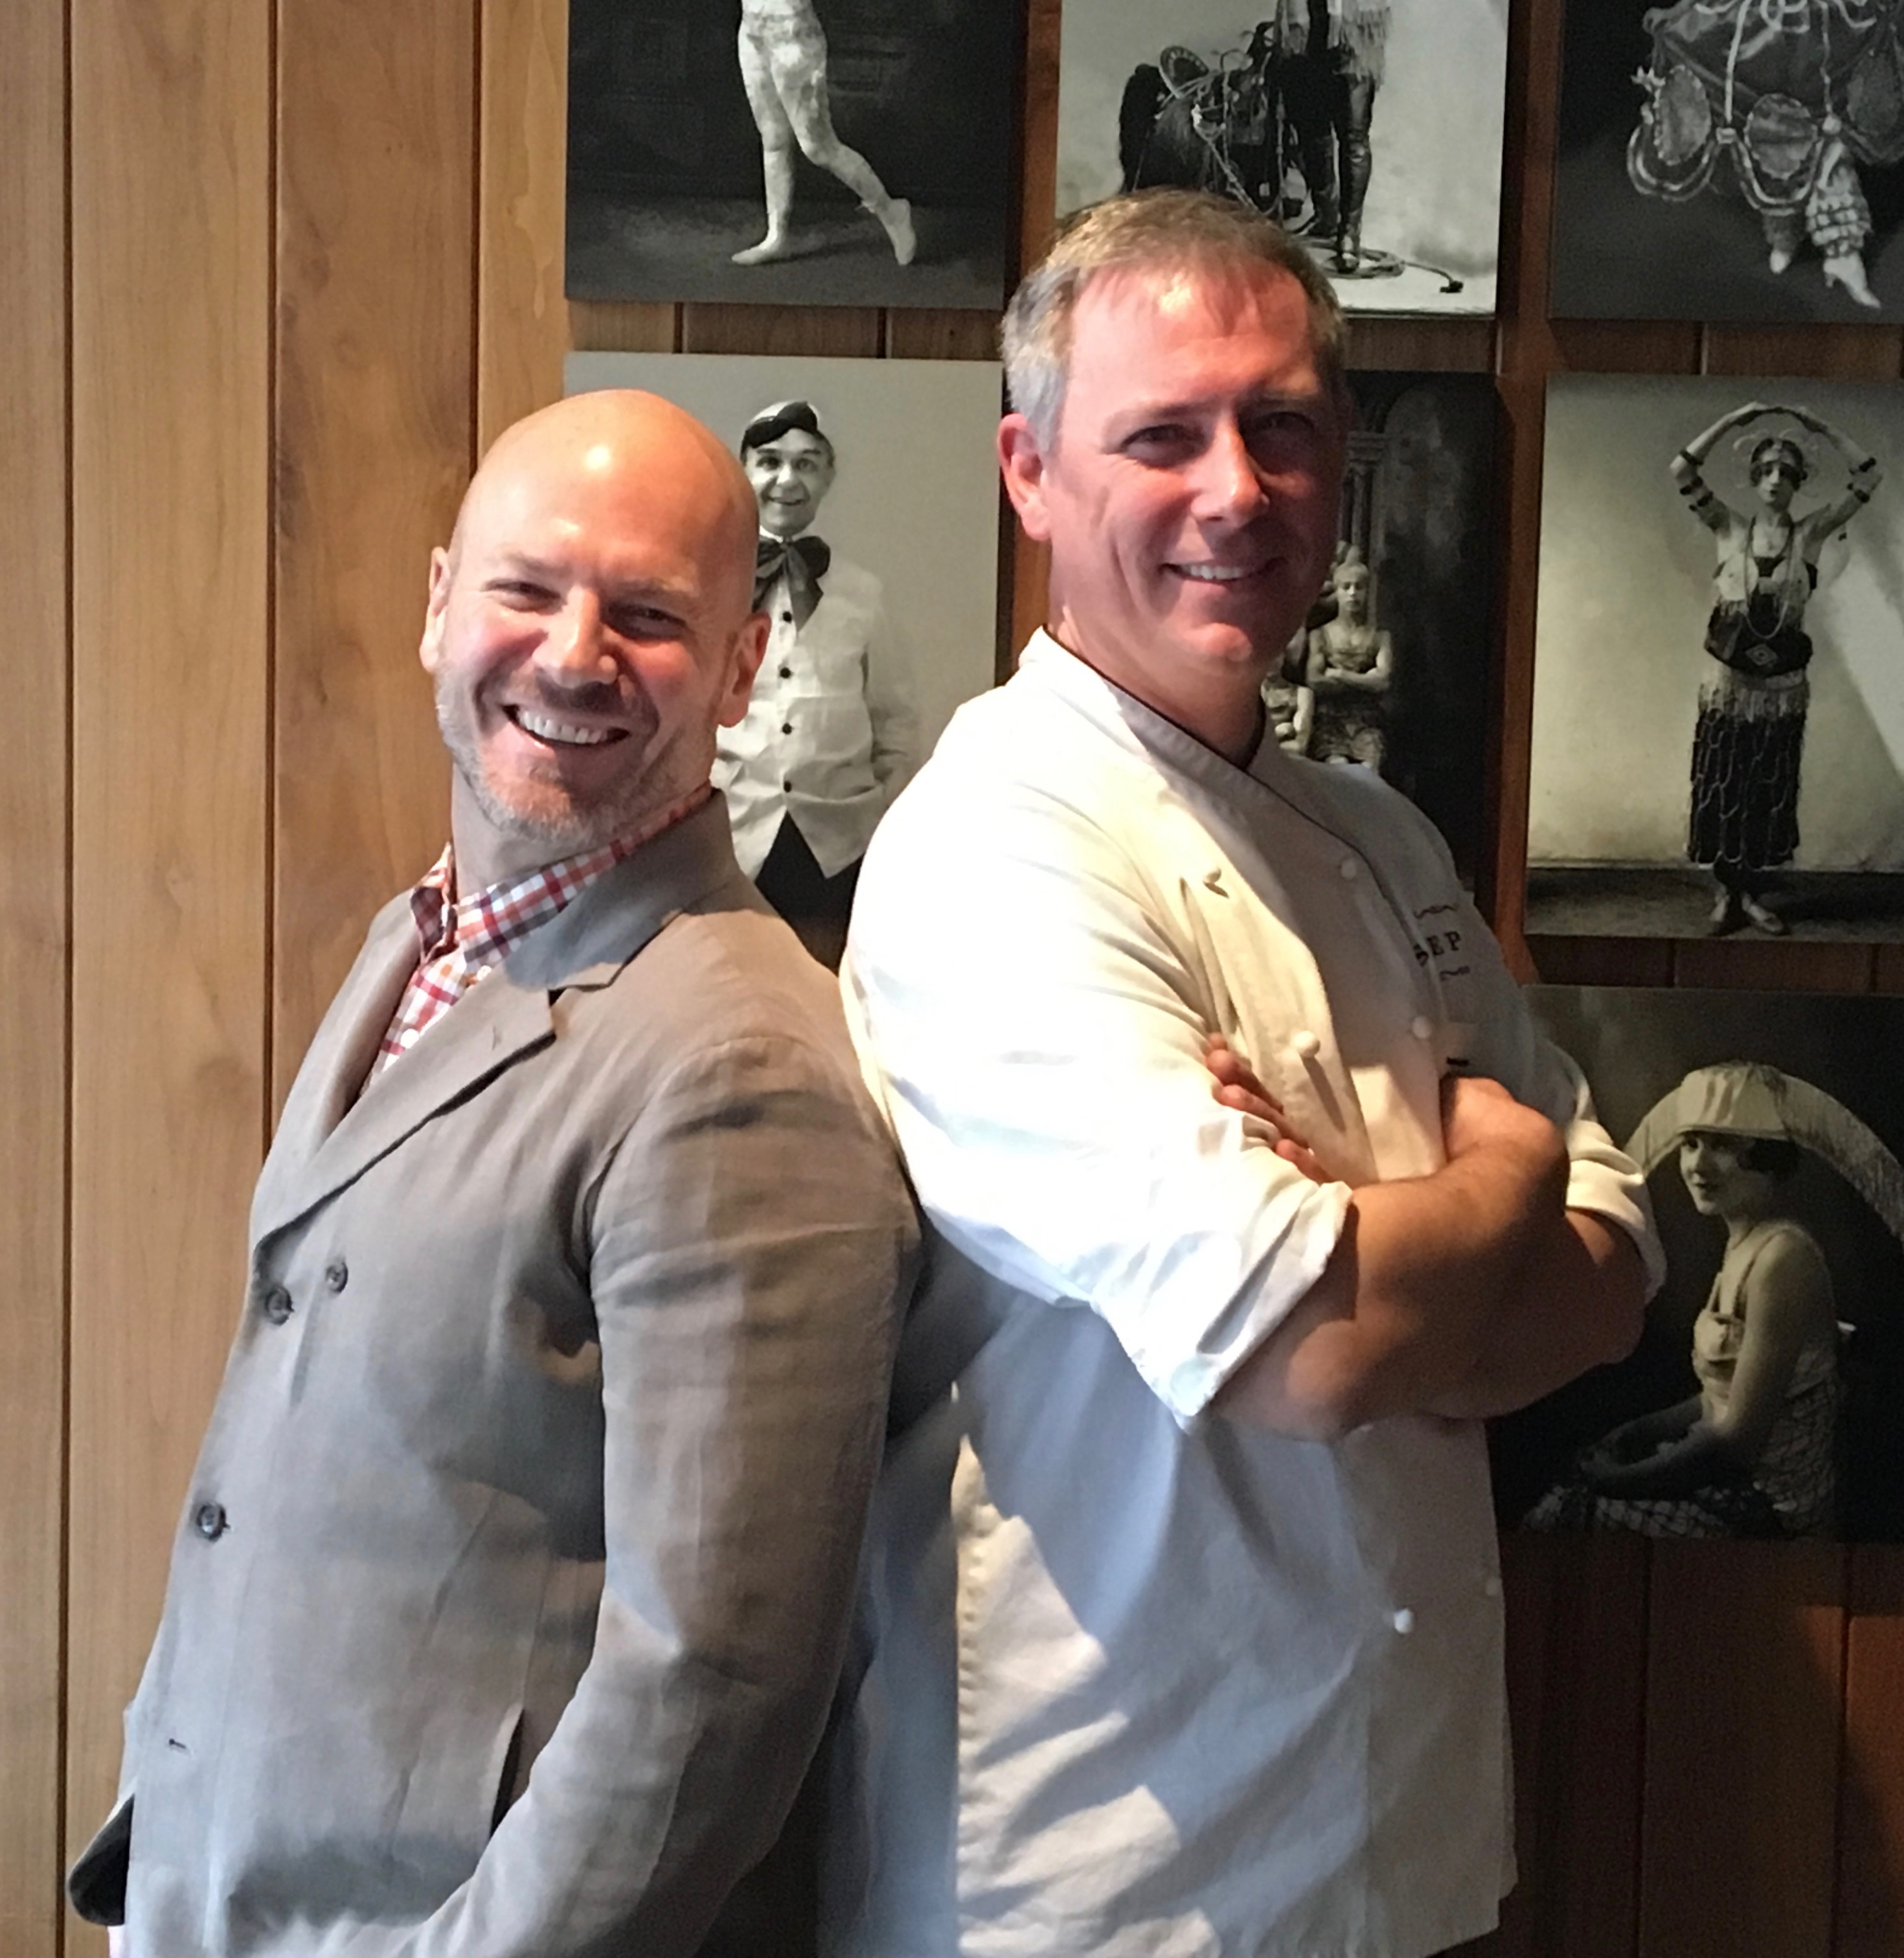 Sepia owner Emmanuel Nony and chef Andrew Zimmerman